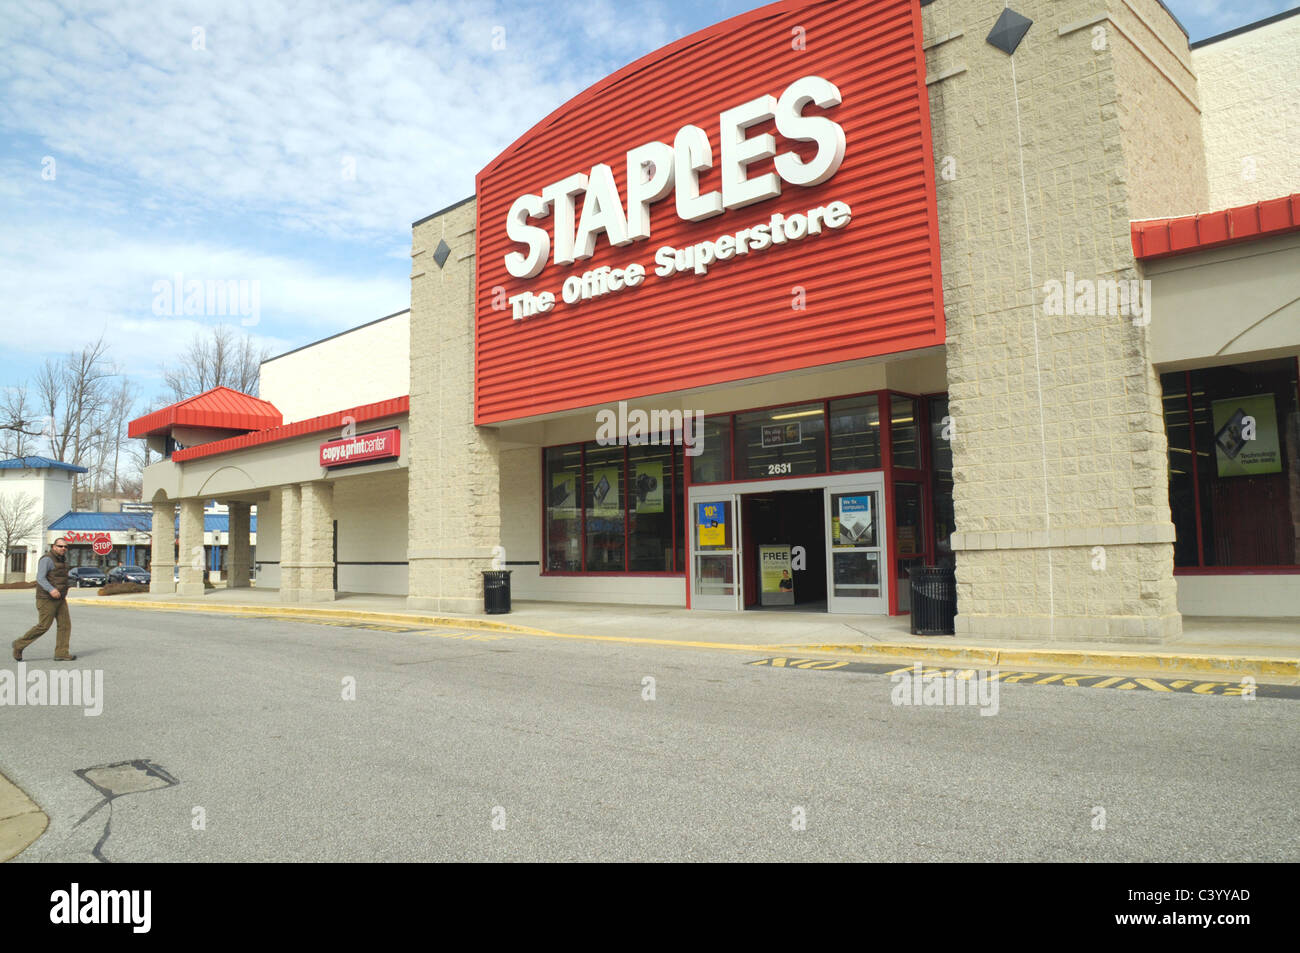 Staples Office Superstore - Visit Cleveland TN